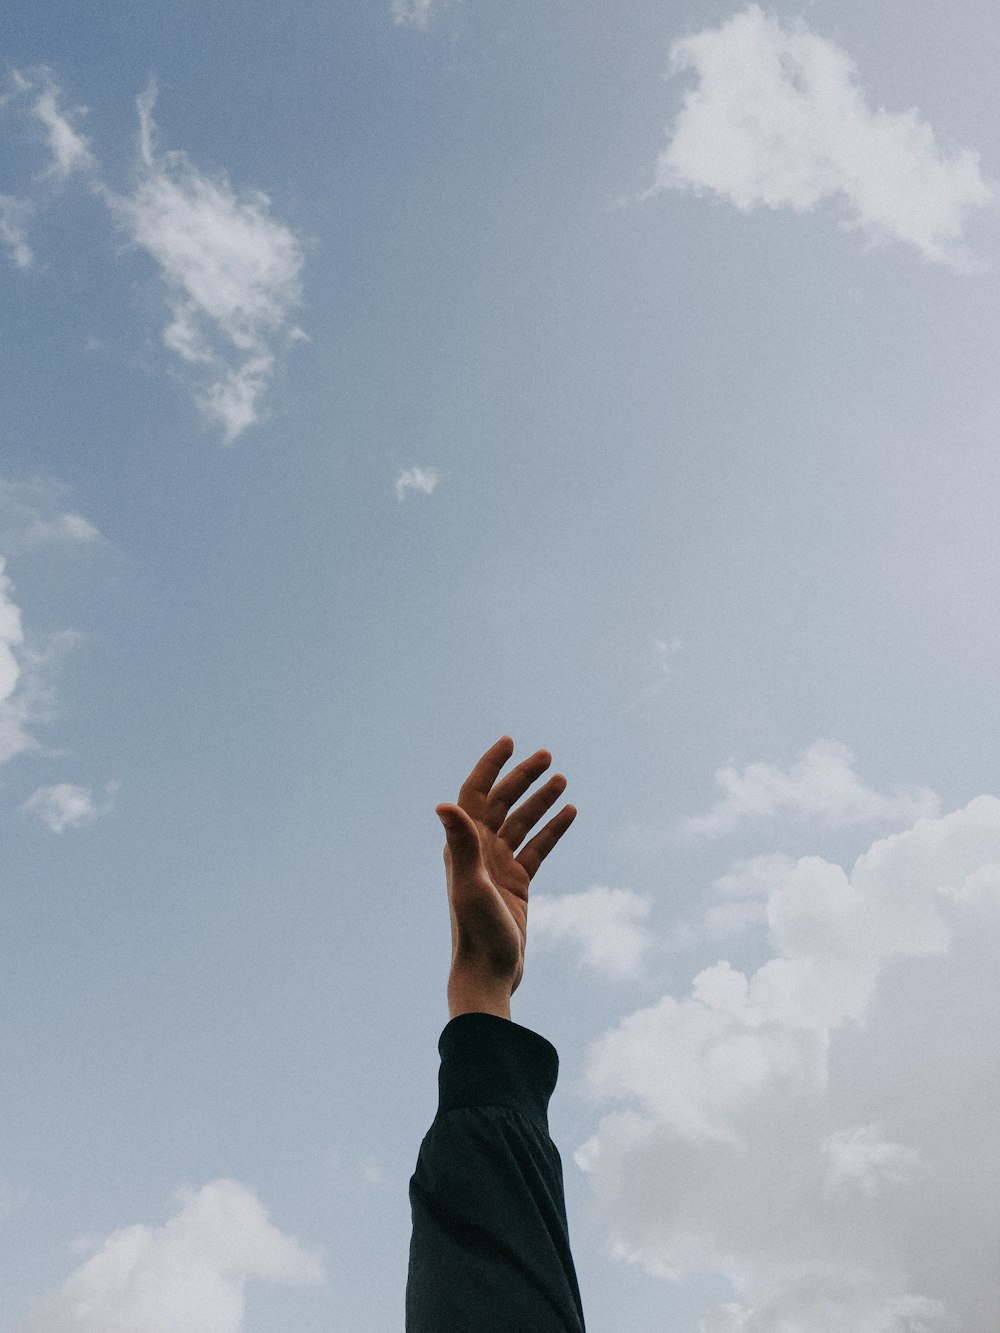 person raising left hand under cloudy sky at daytime